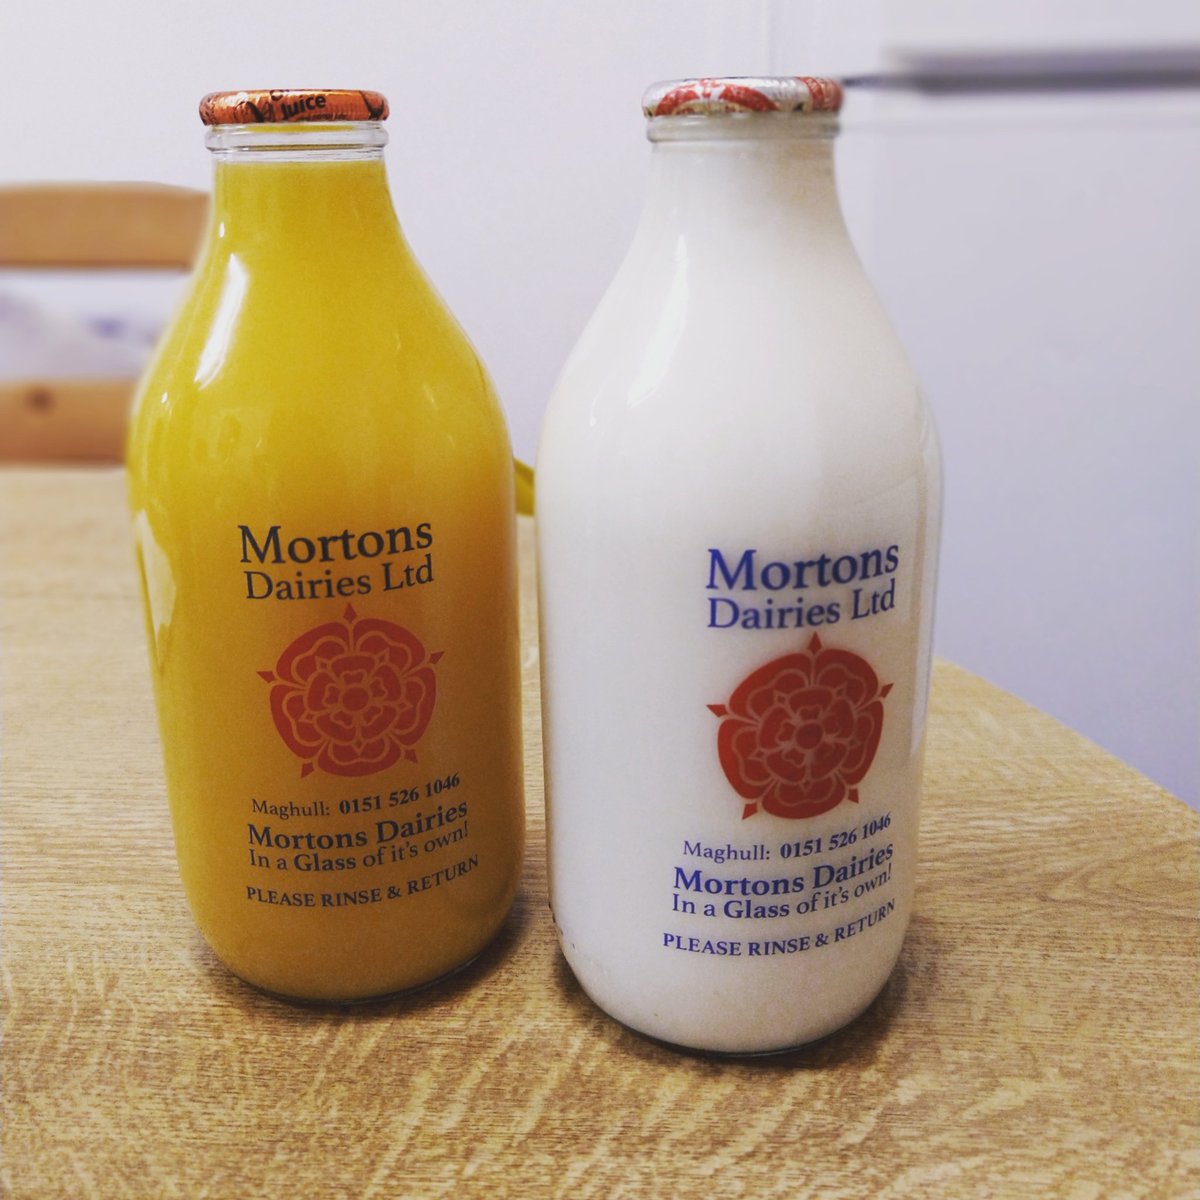 So loving my new morning delivery, and right to my flat door #love #moretonsdairy #endsingleuseplastic